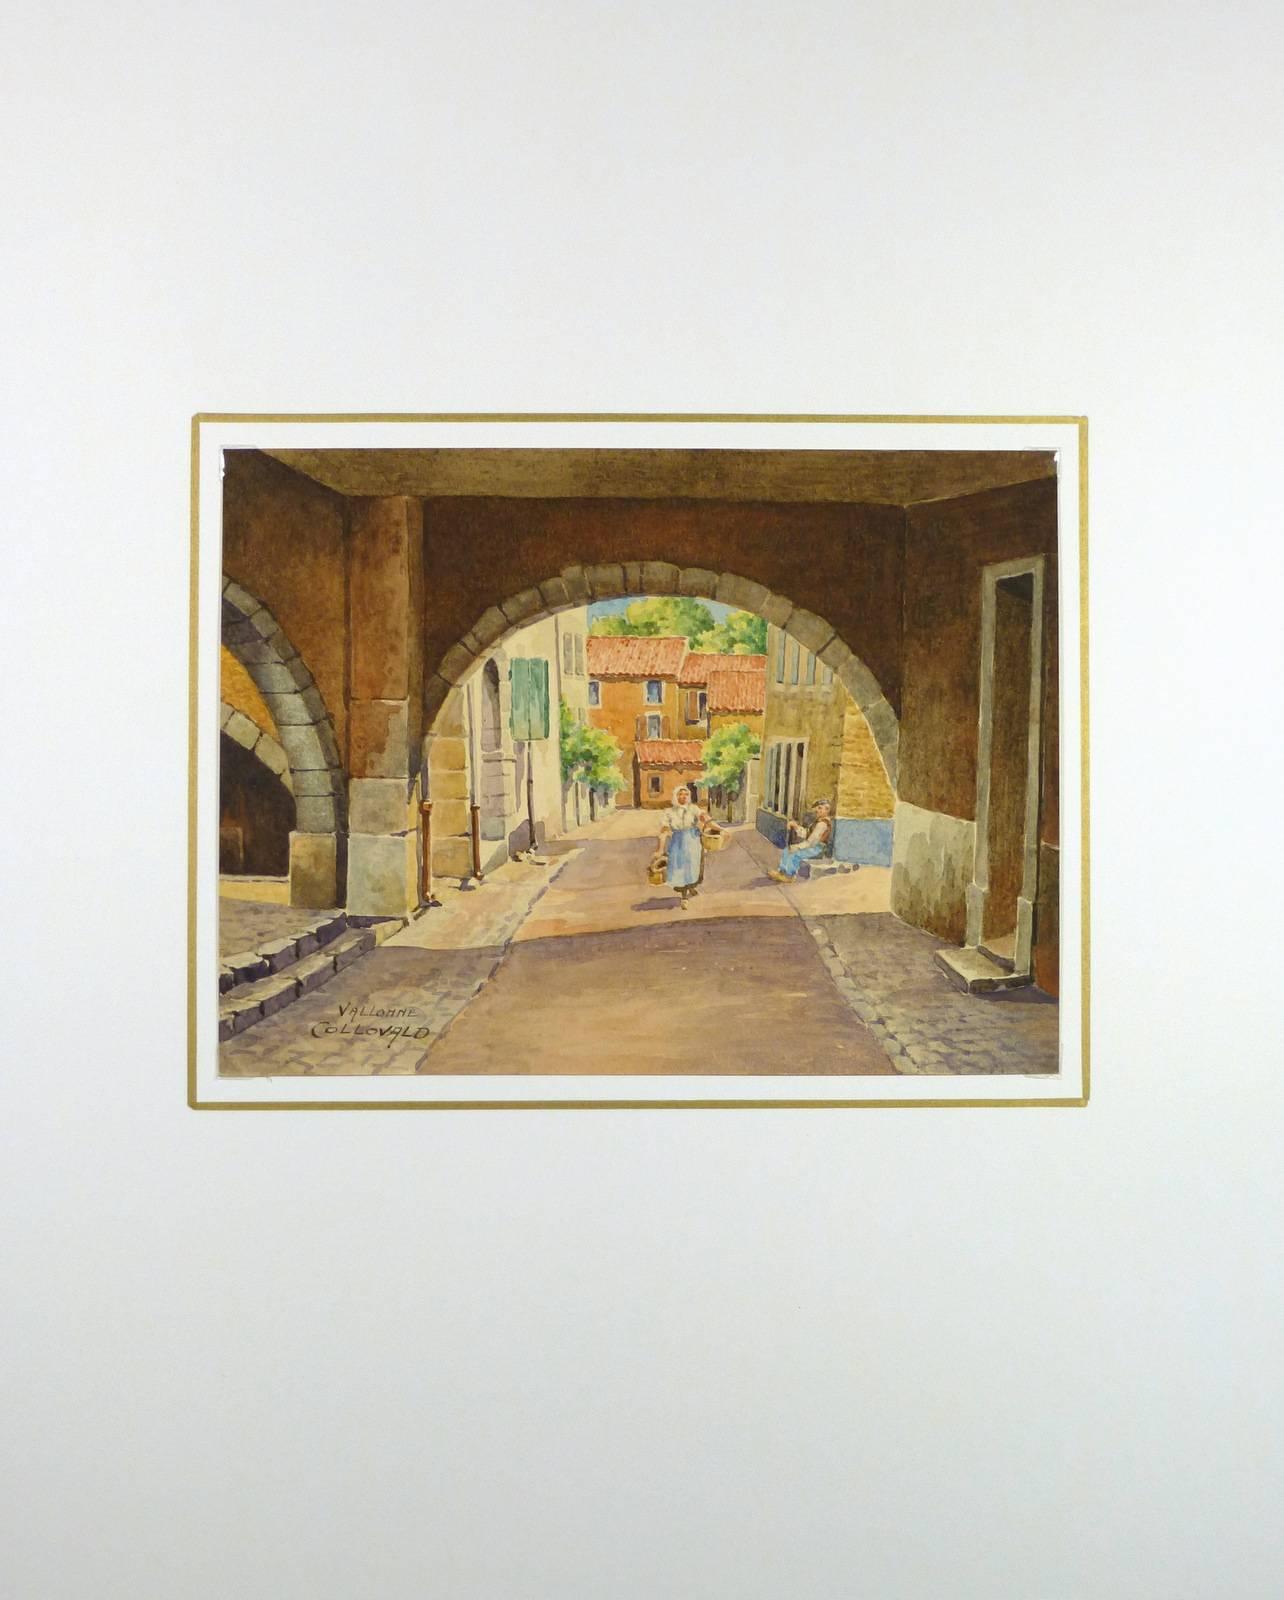 Charming watercolor painting of arch over city street by French artist Genin, circa 1930. Signed lower left.  

Original artwork on paper displayed on a white mat with a gold border. Mat fits a standard-size frame.  Archival plastic sleeve and